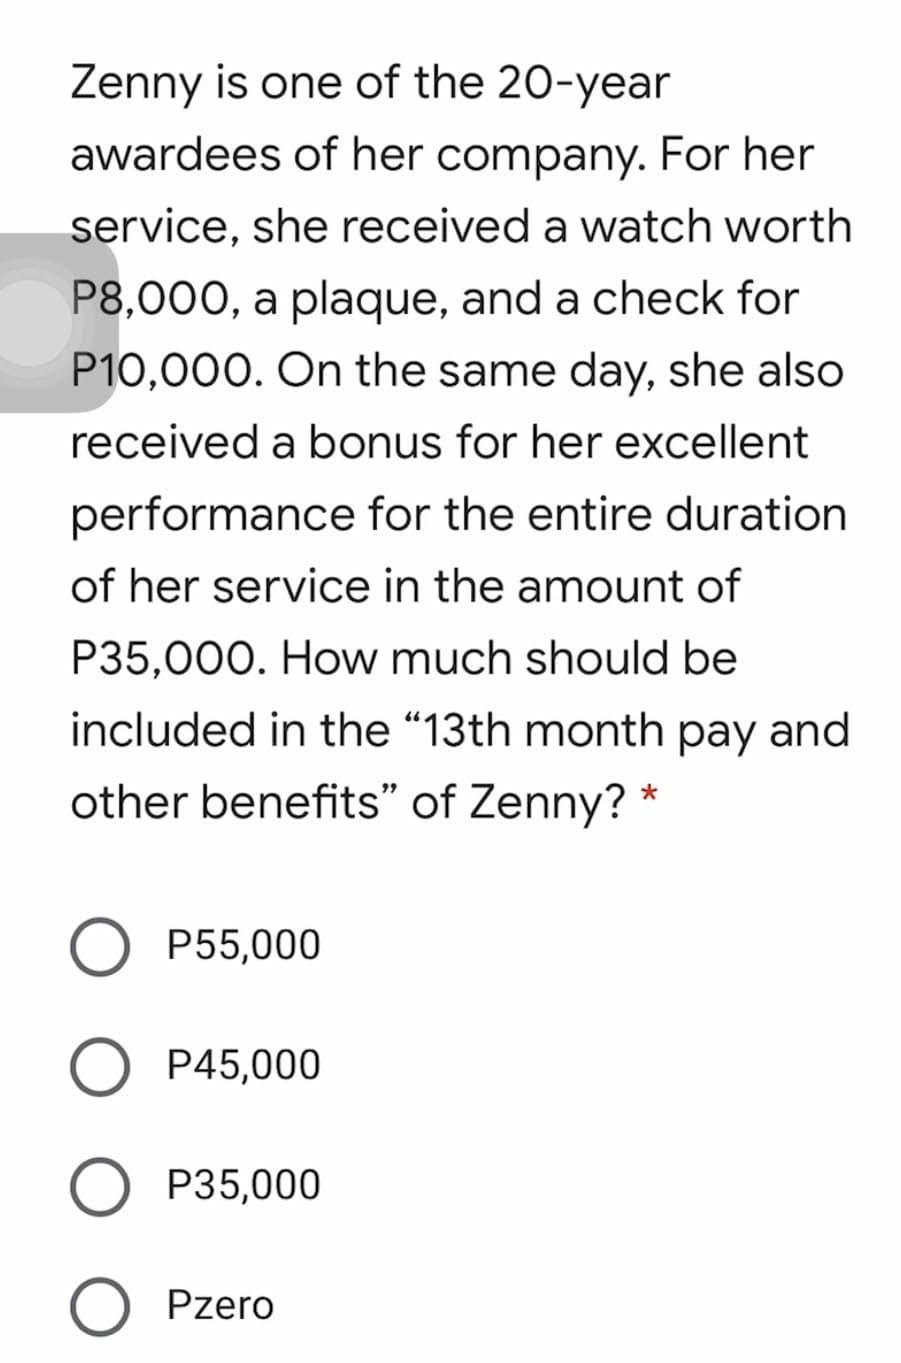 Zenny is one of the 20-year
awardees of her company. For her
service, she received a watch worth
P8,000, a plaque, and a check for
P10,000. On the same day, she also
received a bonus for her excellent
performance for the entire duration
of her service in the amount of
P35,000. How much should be
included in the "13th month pay and
other benefits" of Zenny? *
P55,000
O P45,000
P35,000
O Pzero
